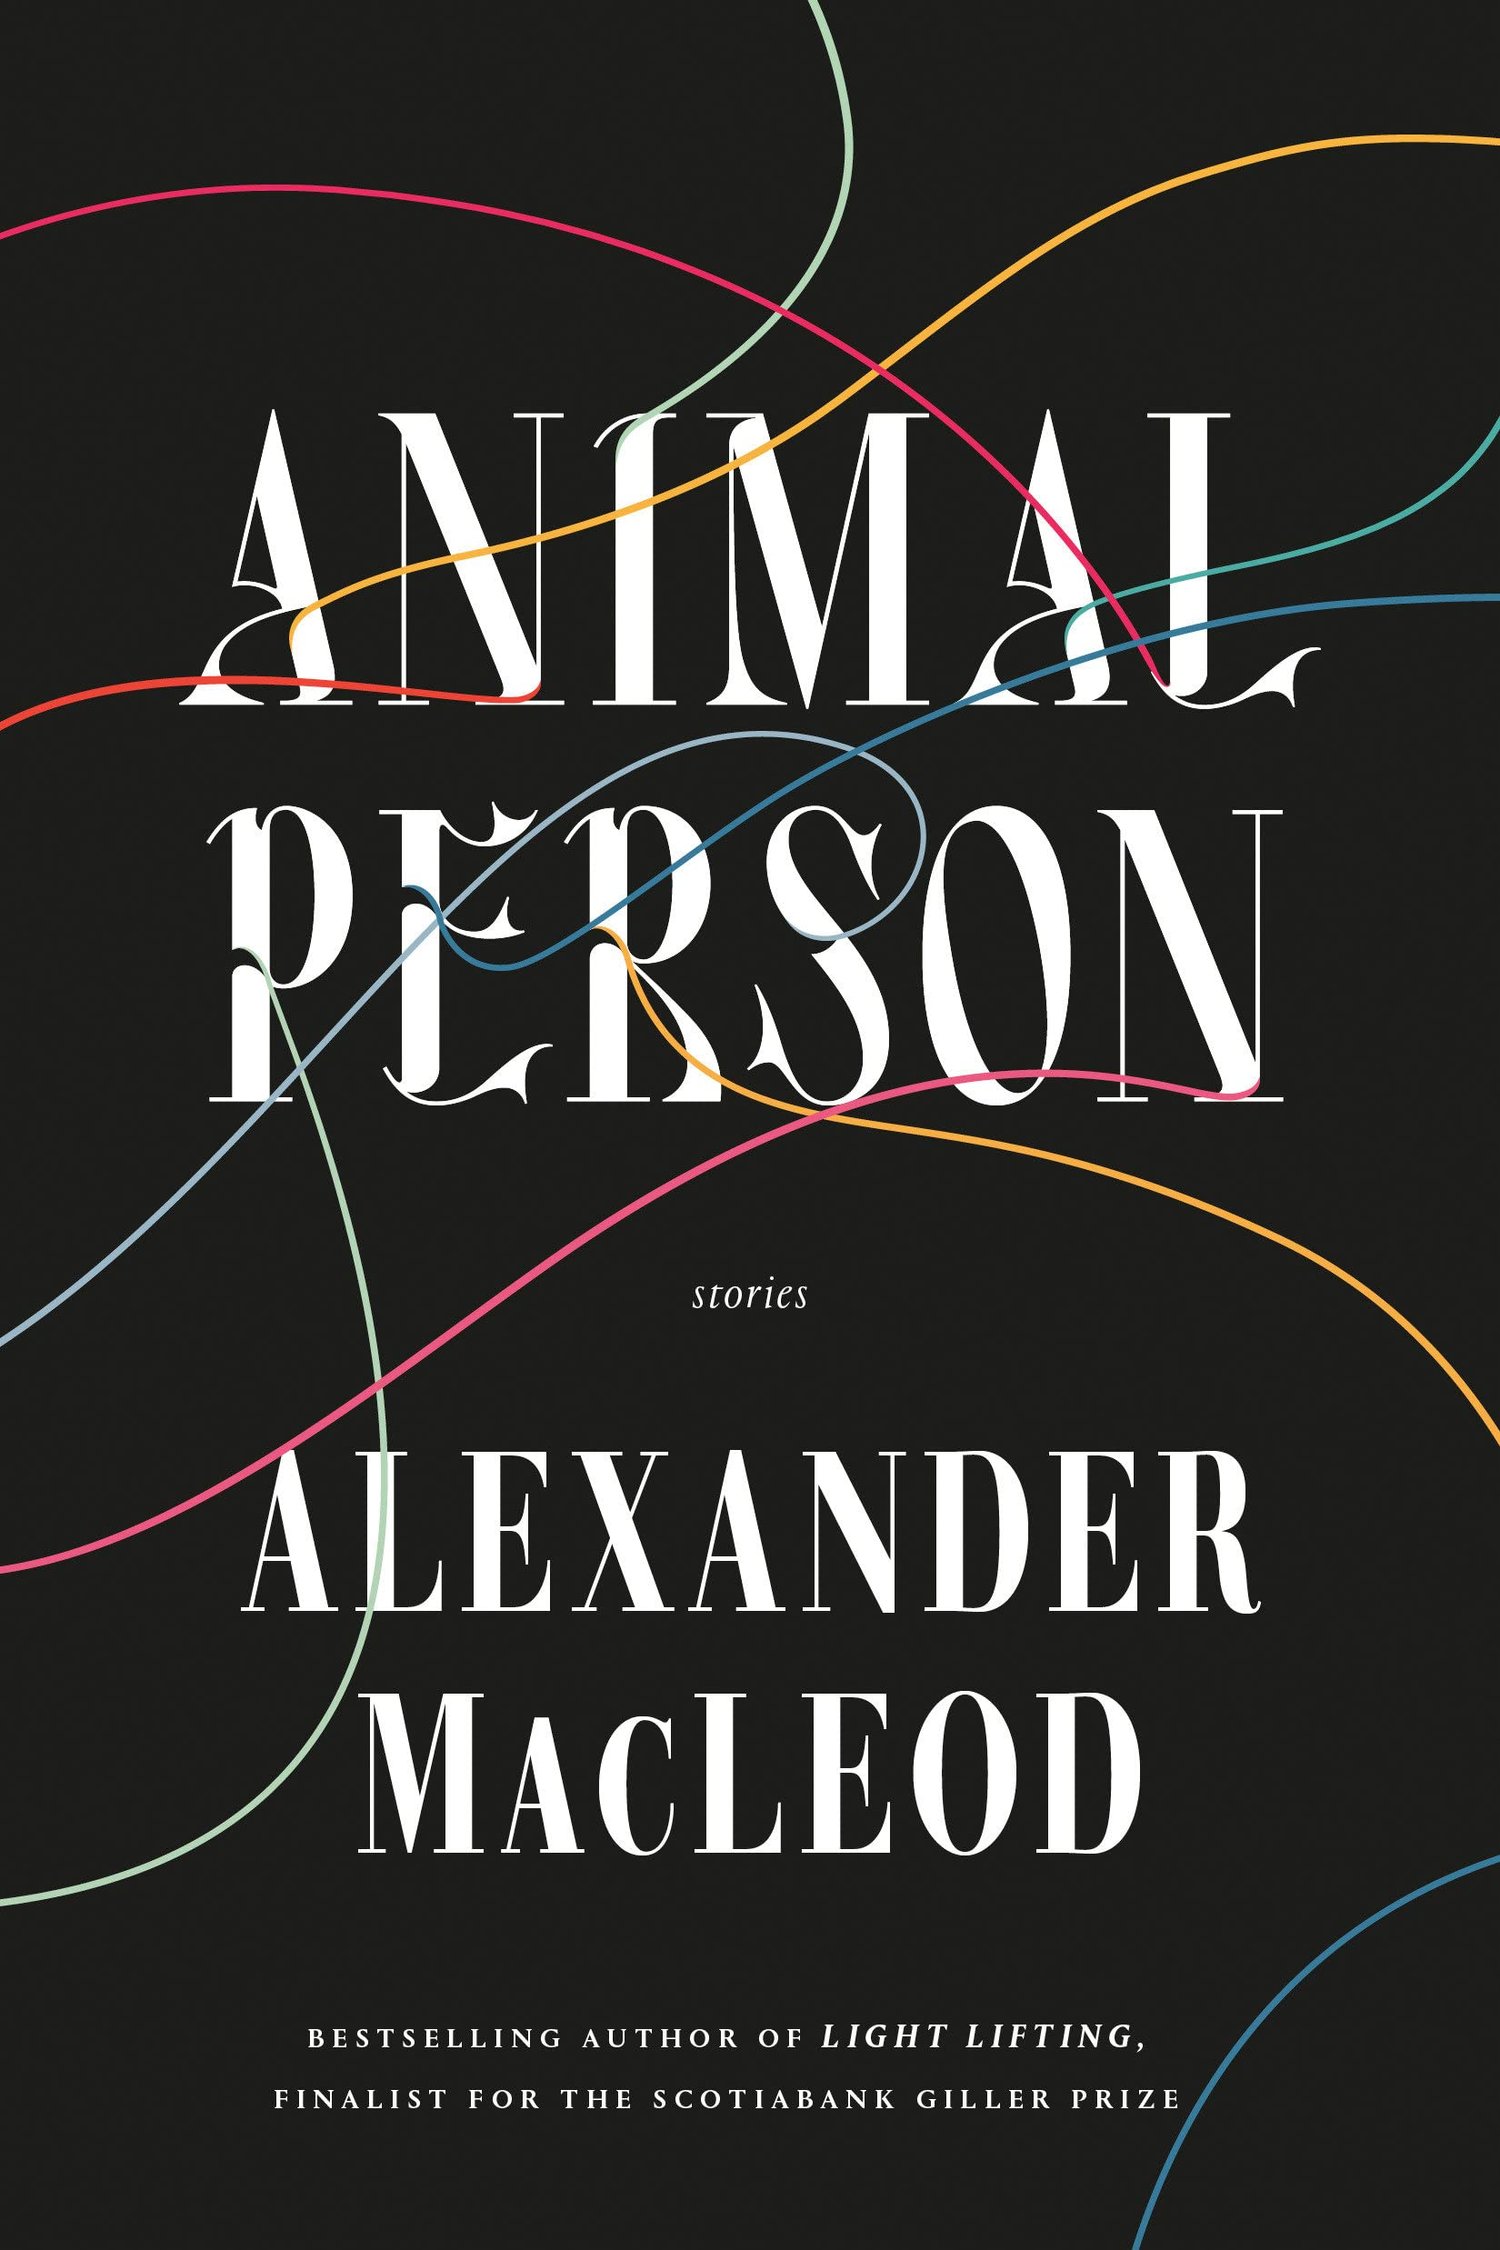 Animal Person, by Alexander MacLeod — Flying Books